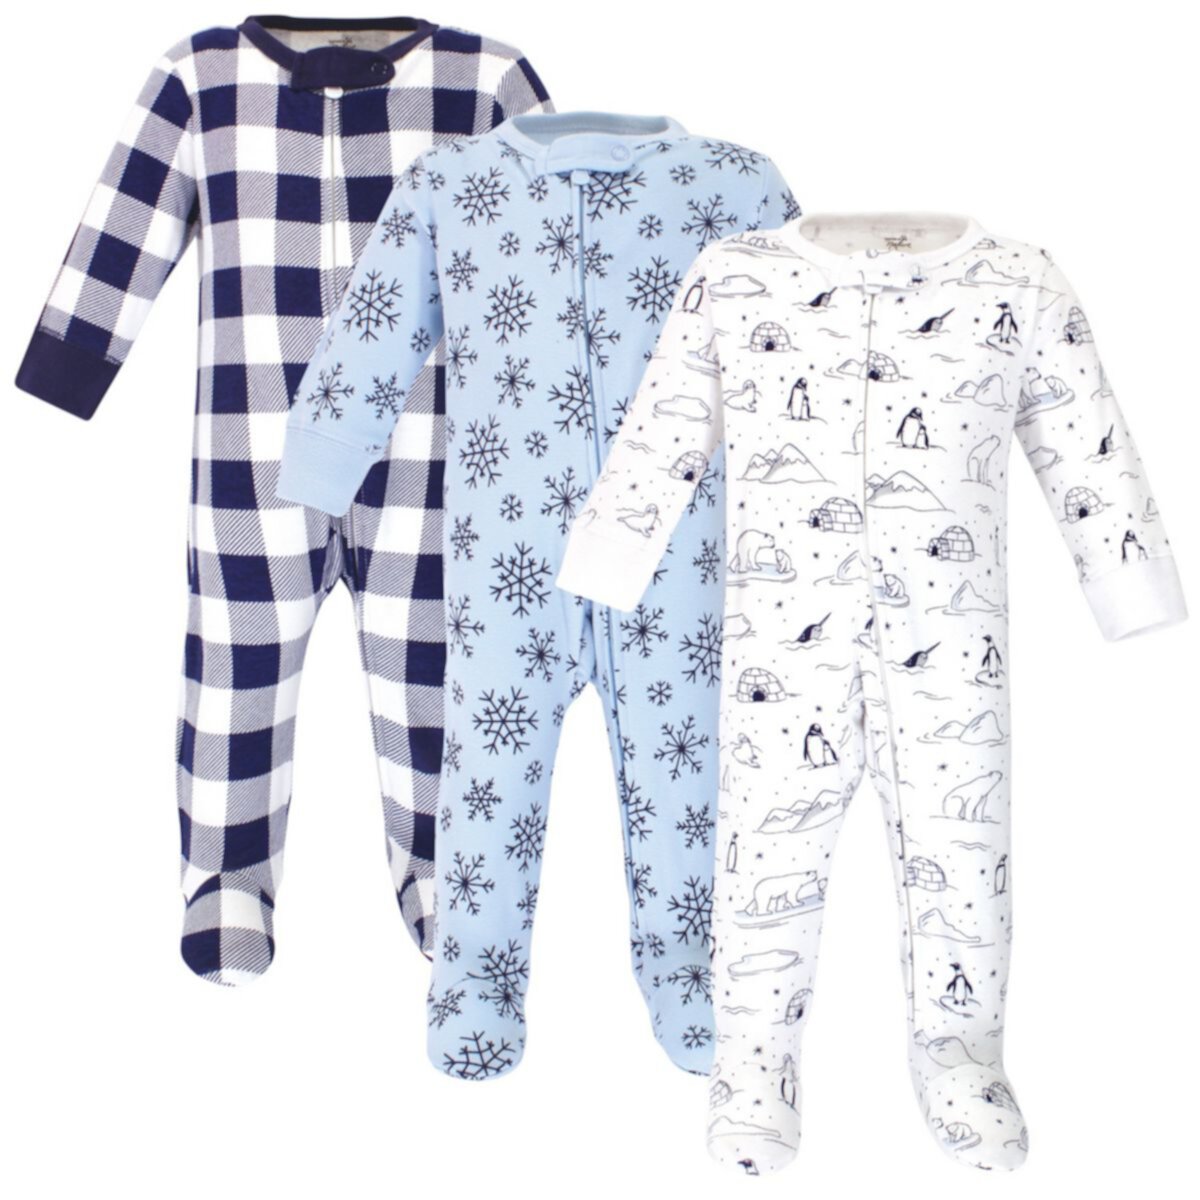 Touched by Nature Baby Organic Cotton Zipper Sleep and Play 3pk, Arctic Touched by Nature